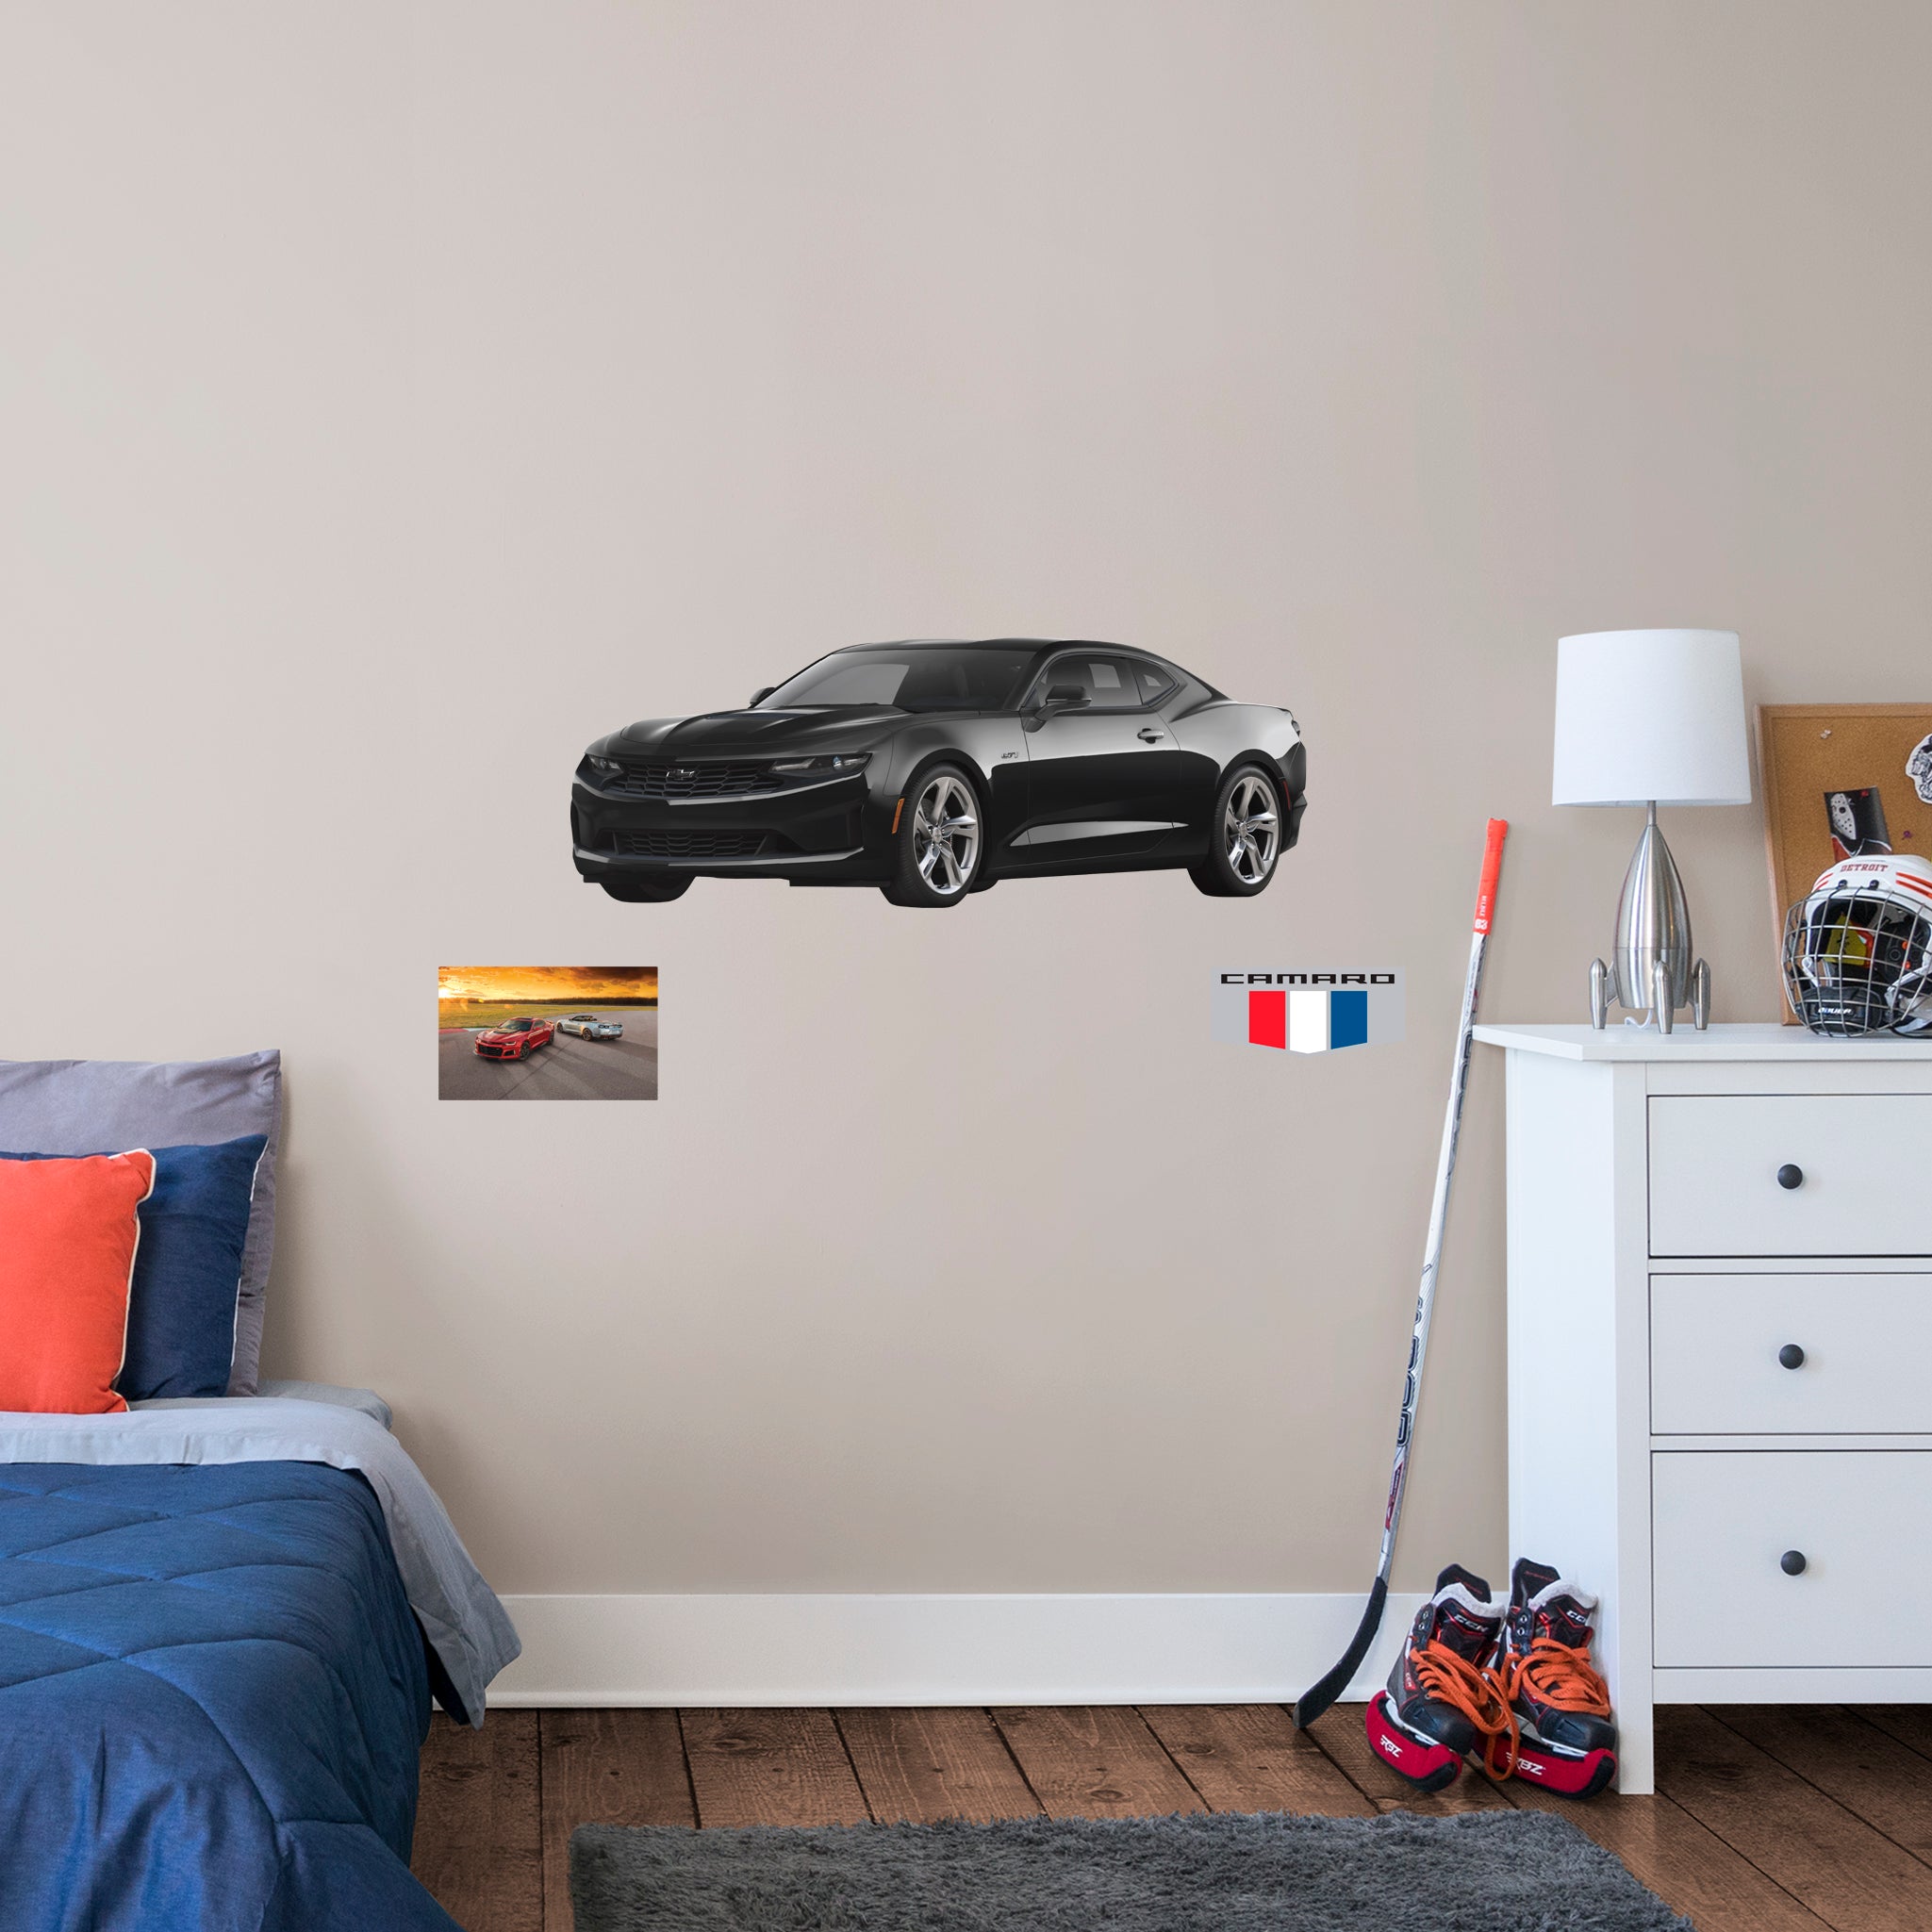 Chevrolet Black Camaro: Officially Licensed GM Removable Wall Decal Giant + 2 Decals by Fathead | Vinyl